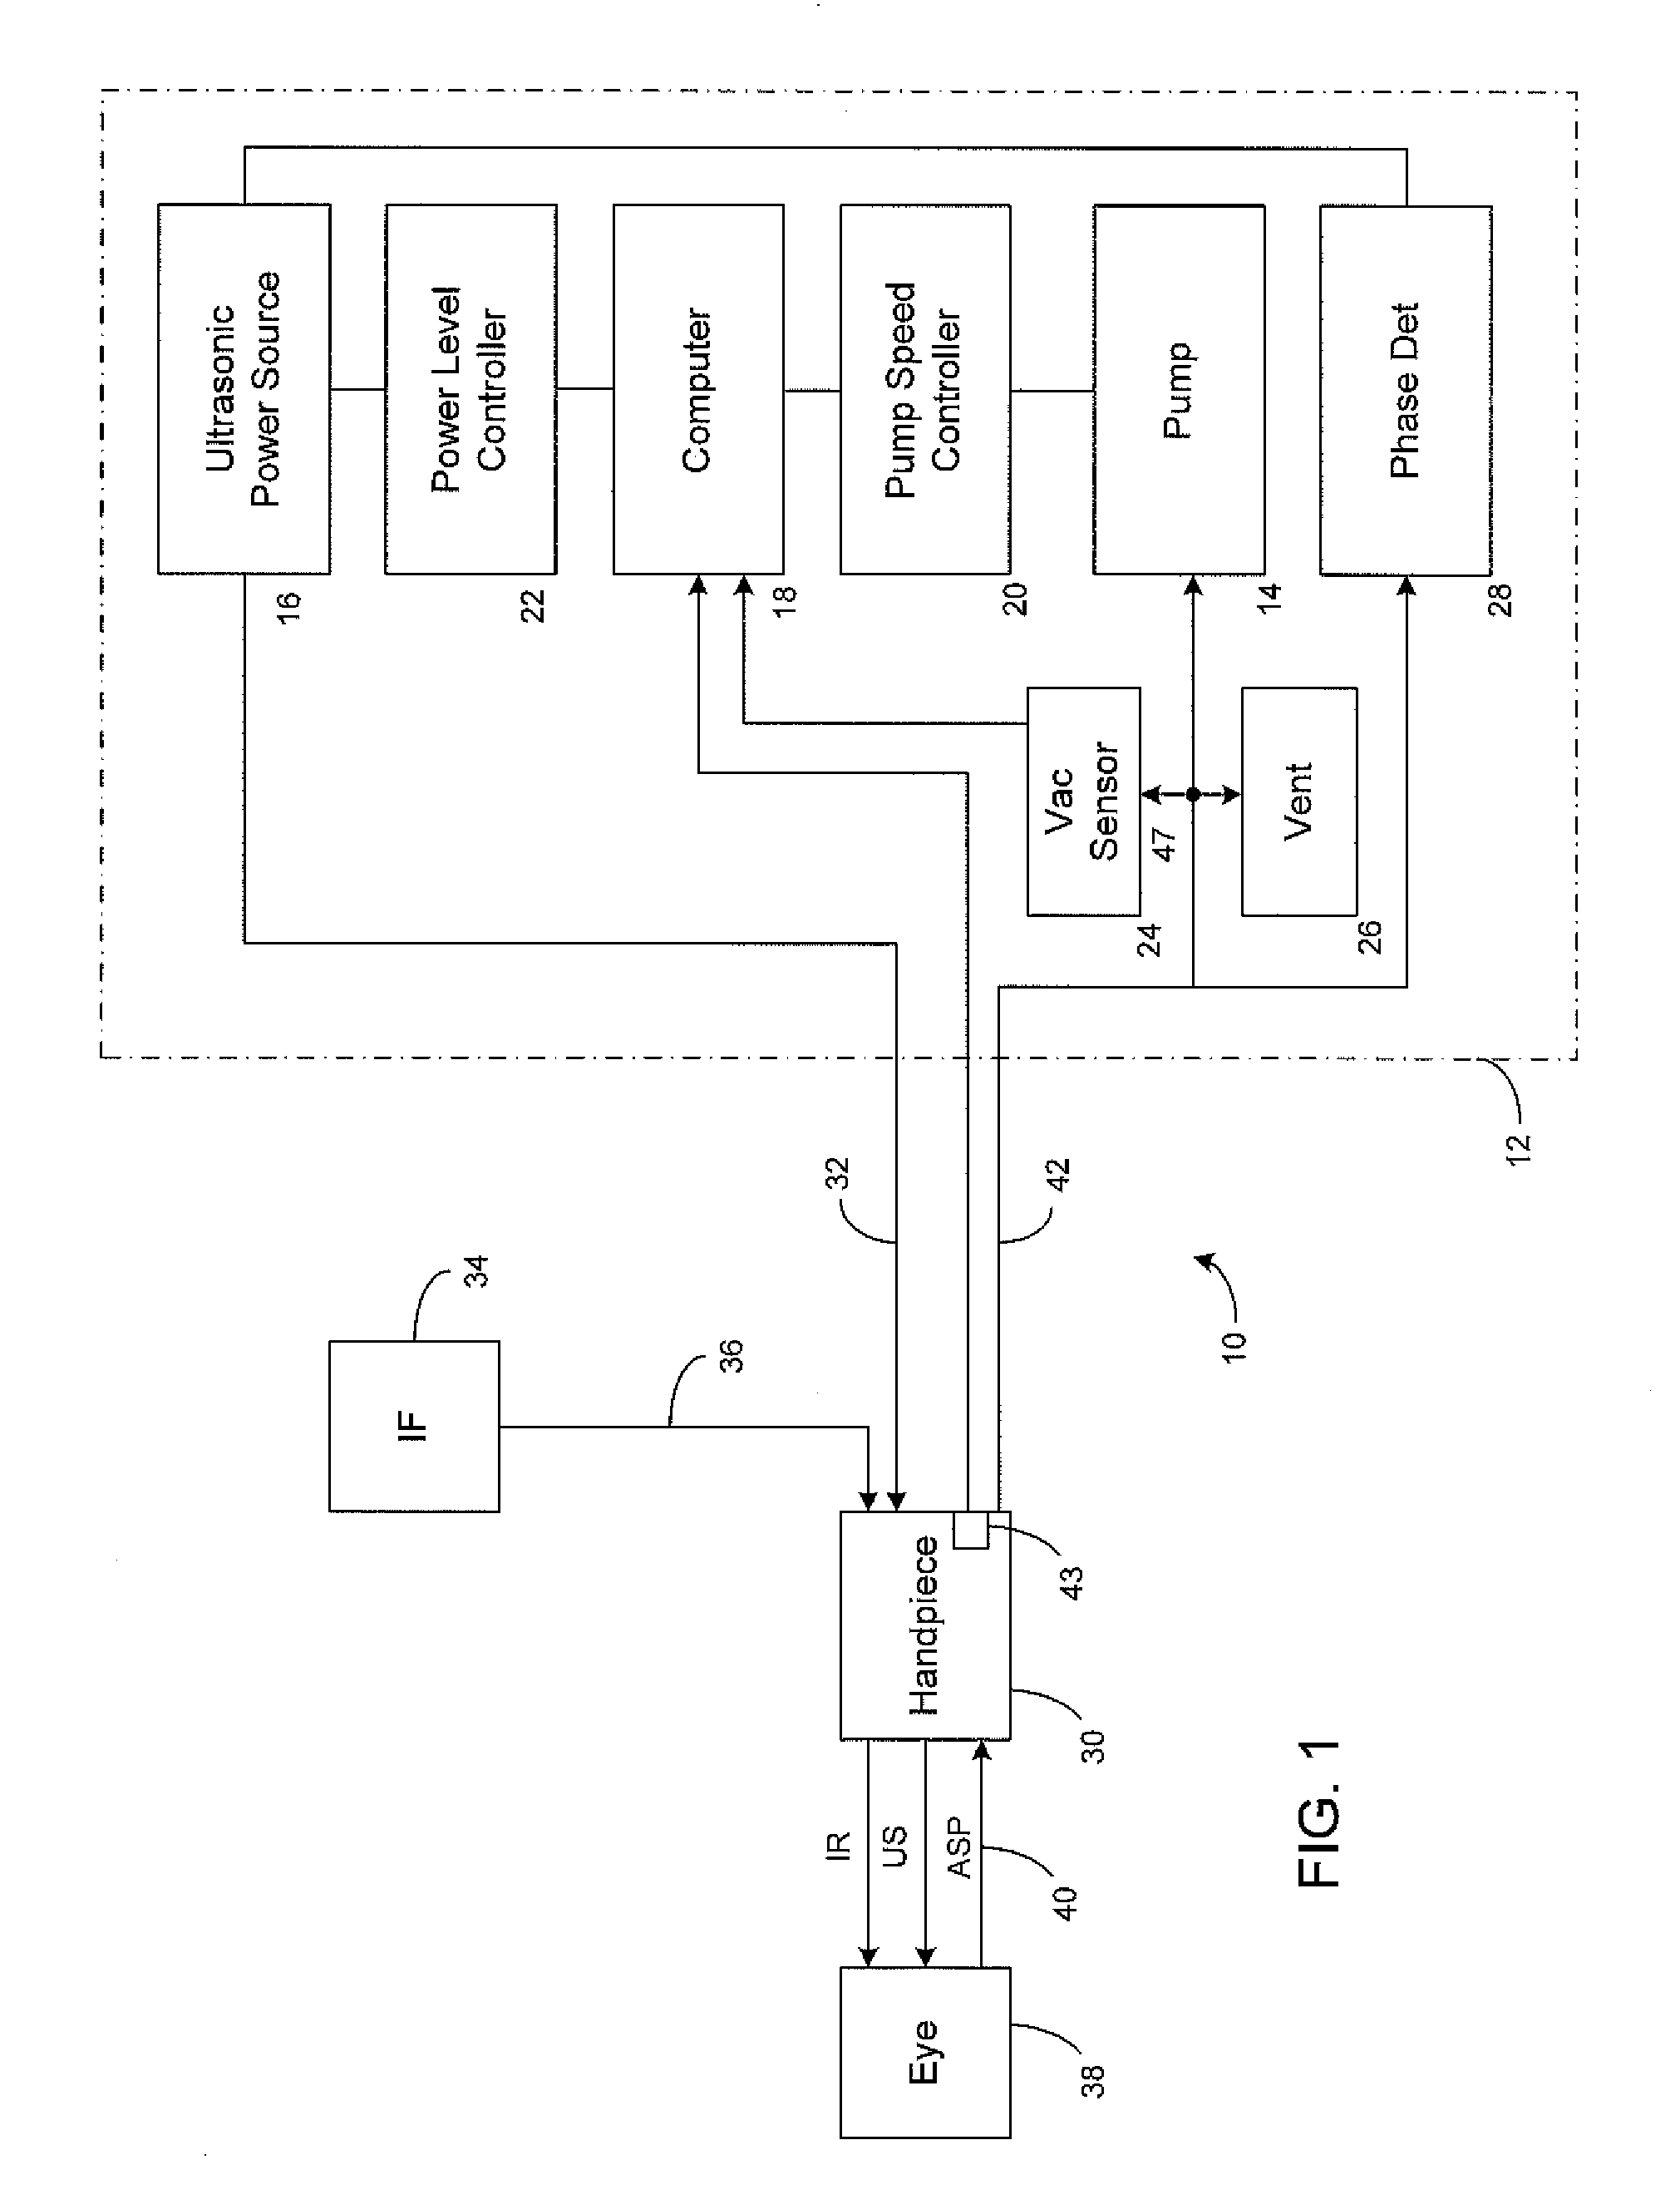 Fluid management system for use in a medical procedure